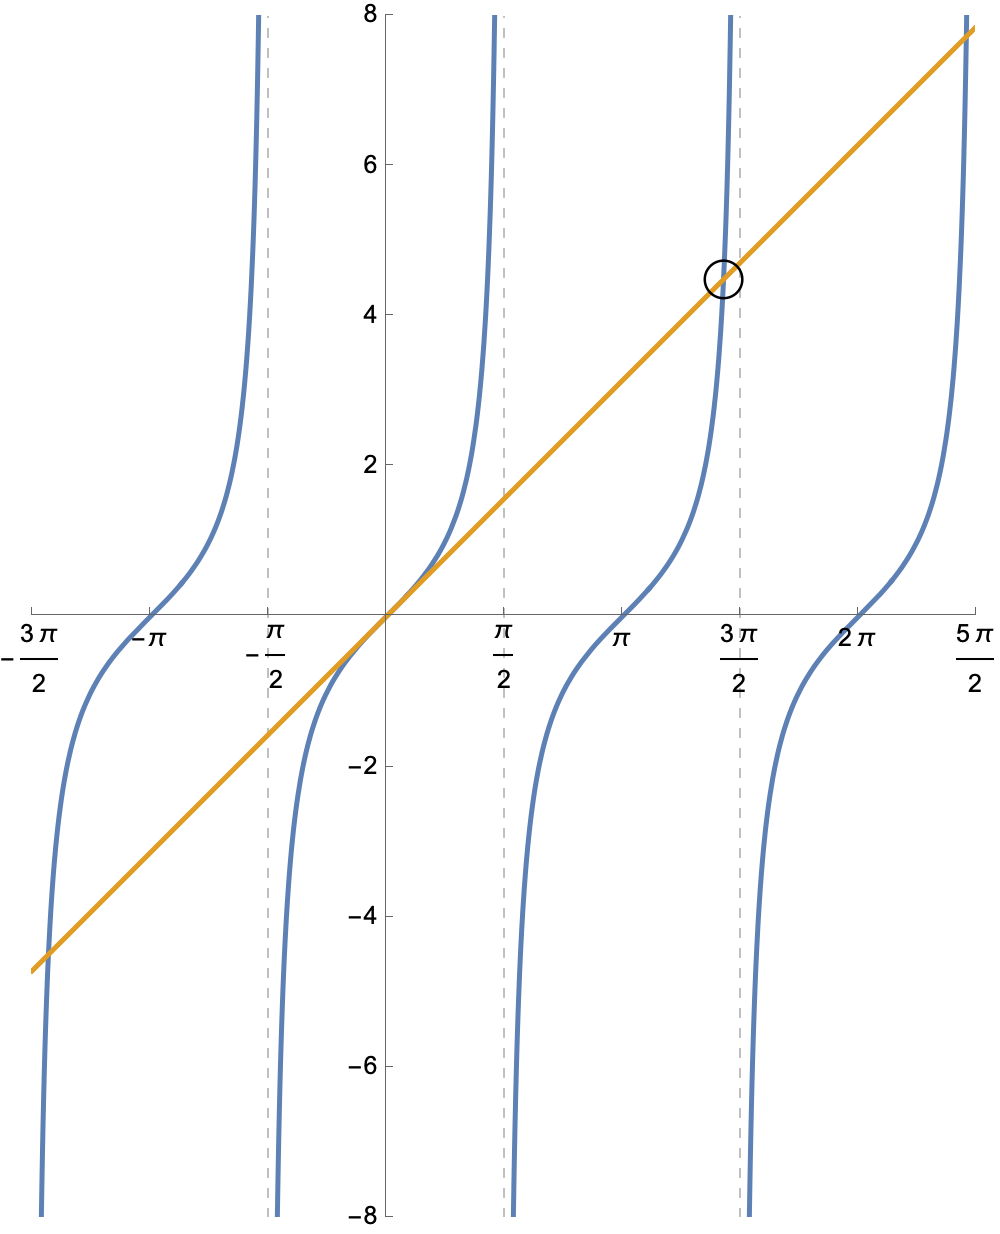 Tangent and line plot